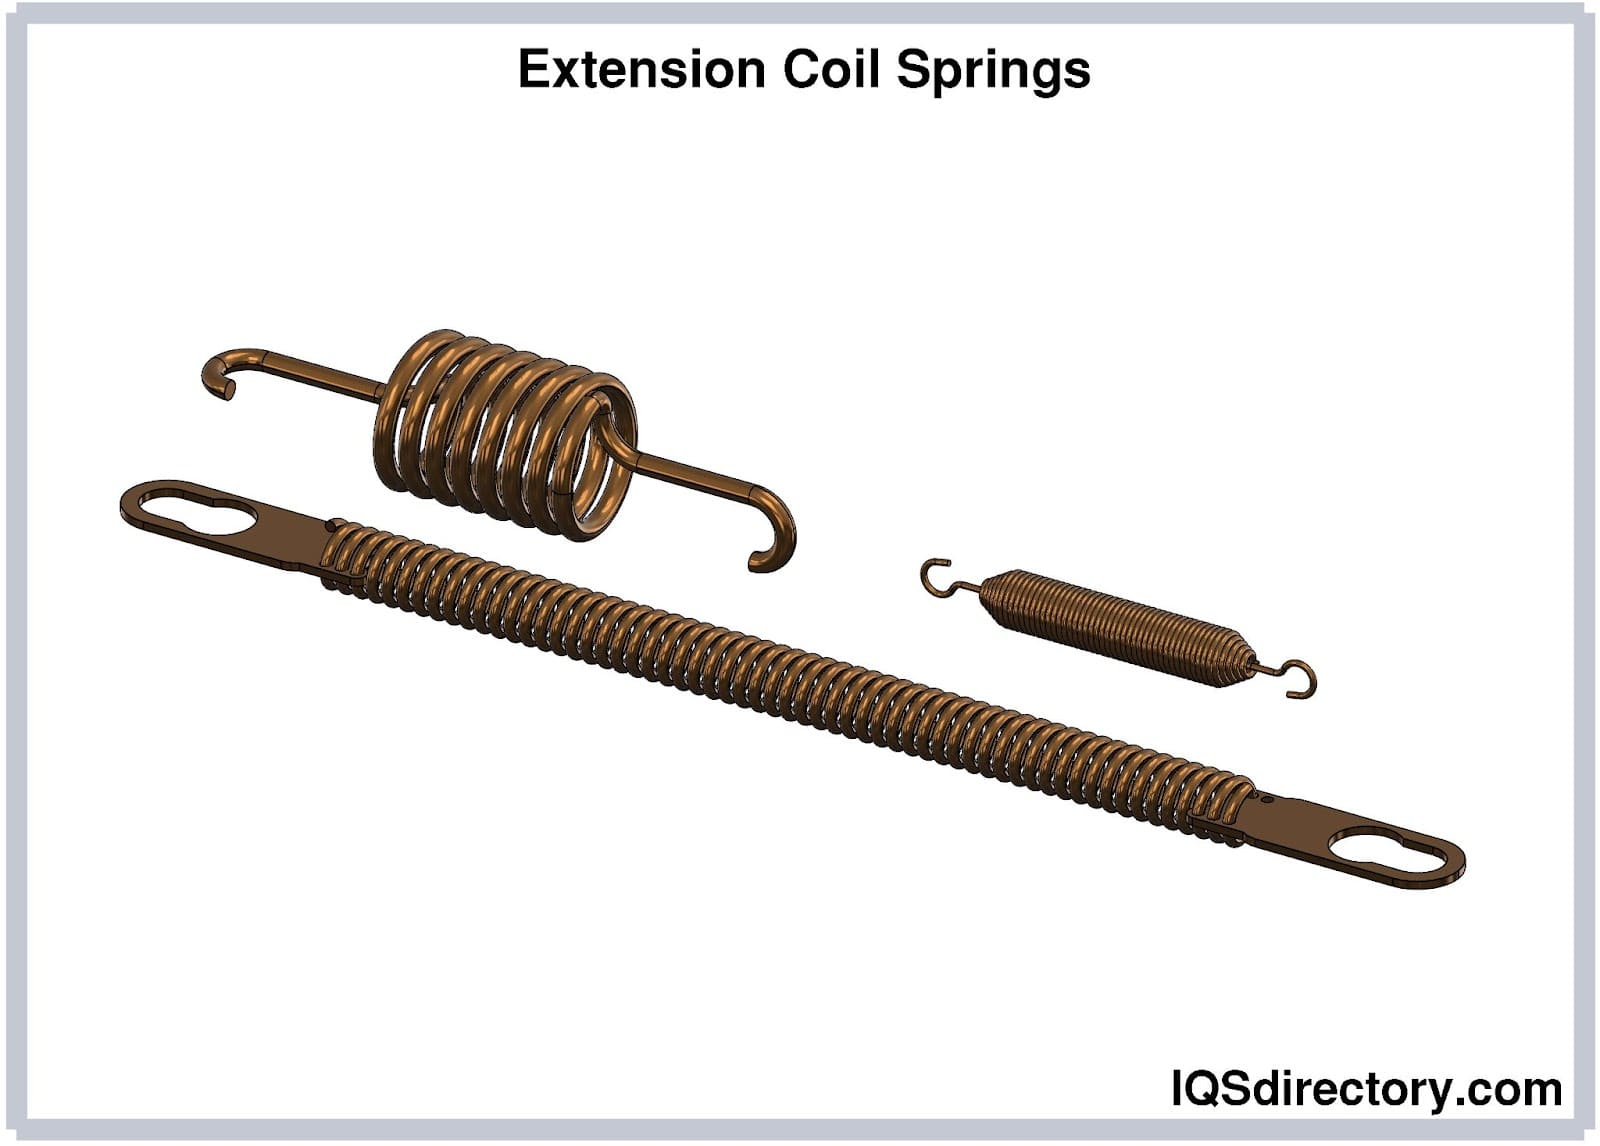 Extension Coil Springs